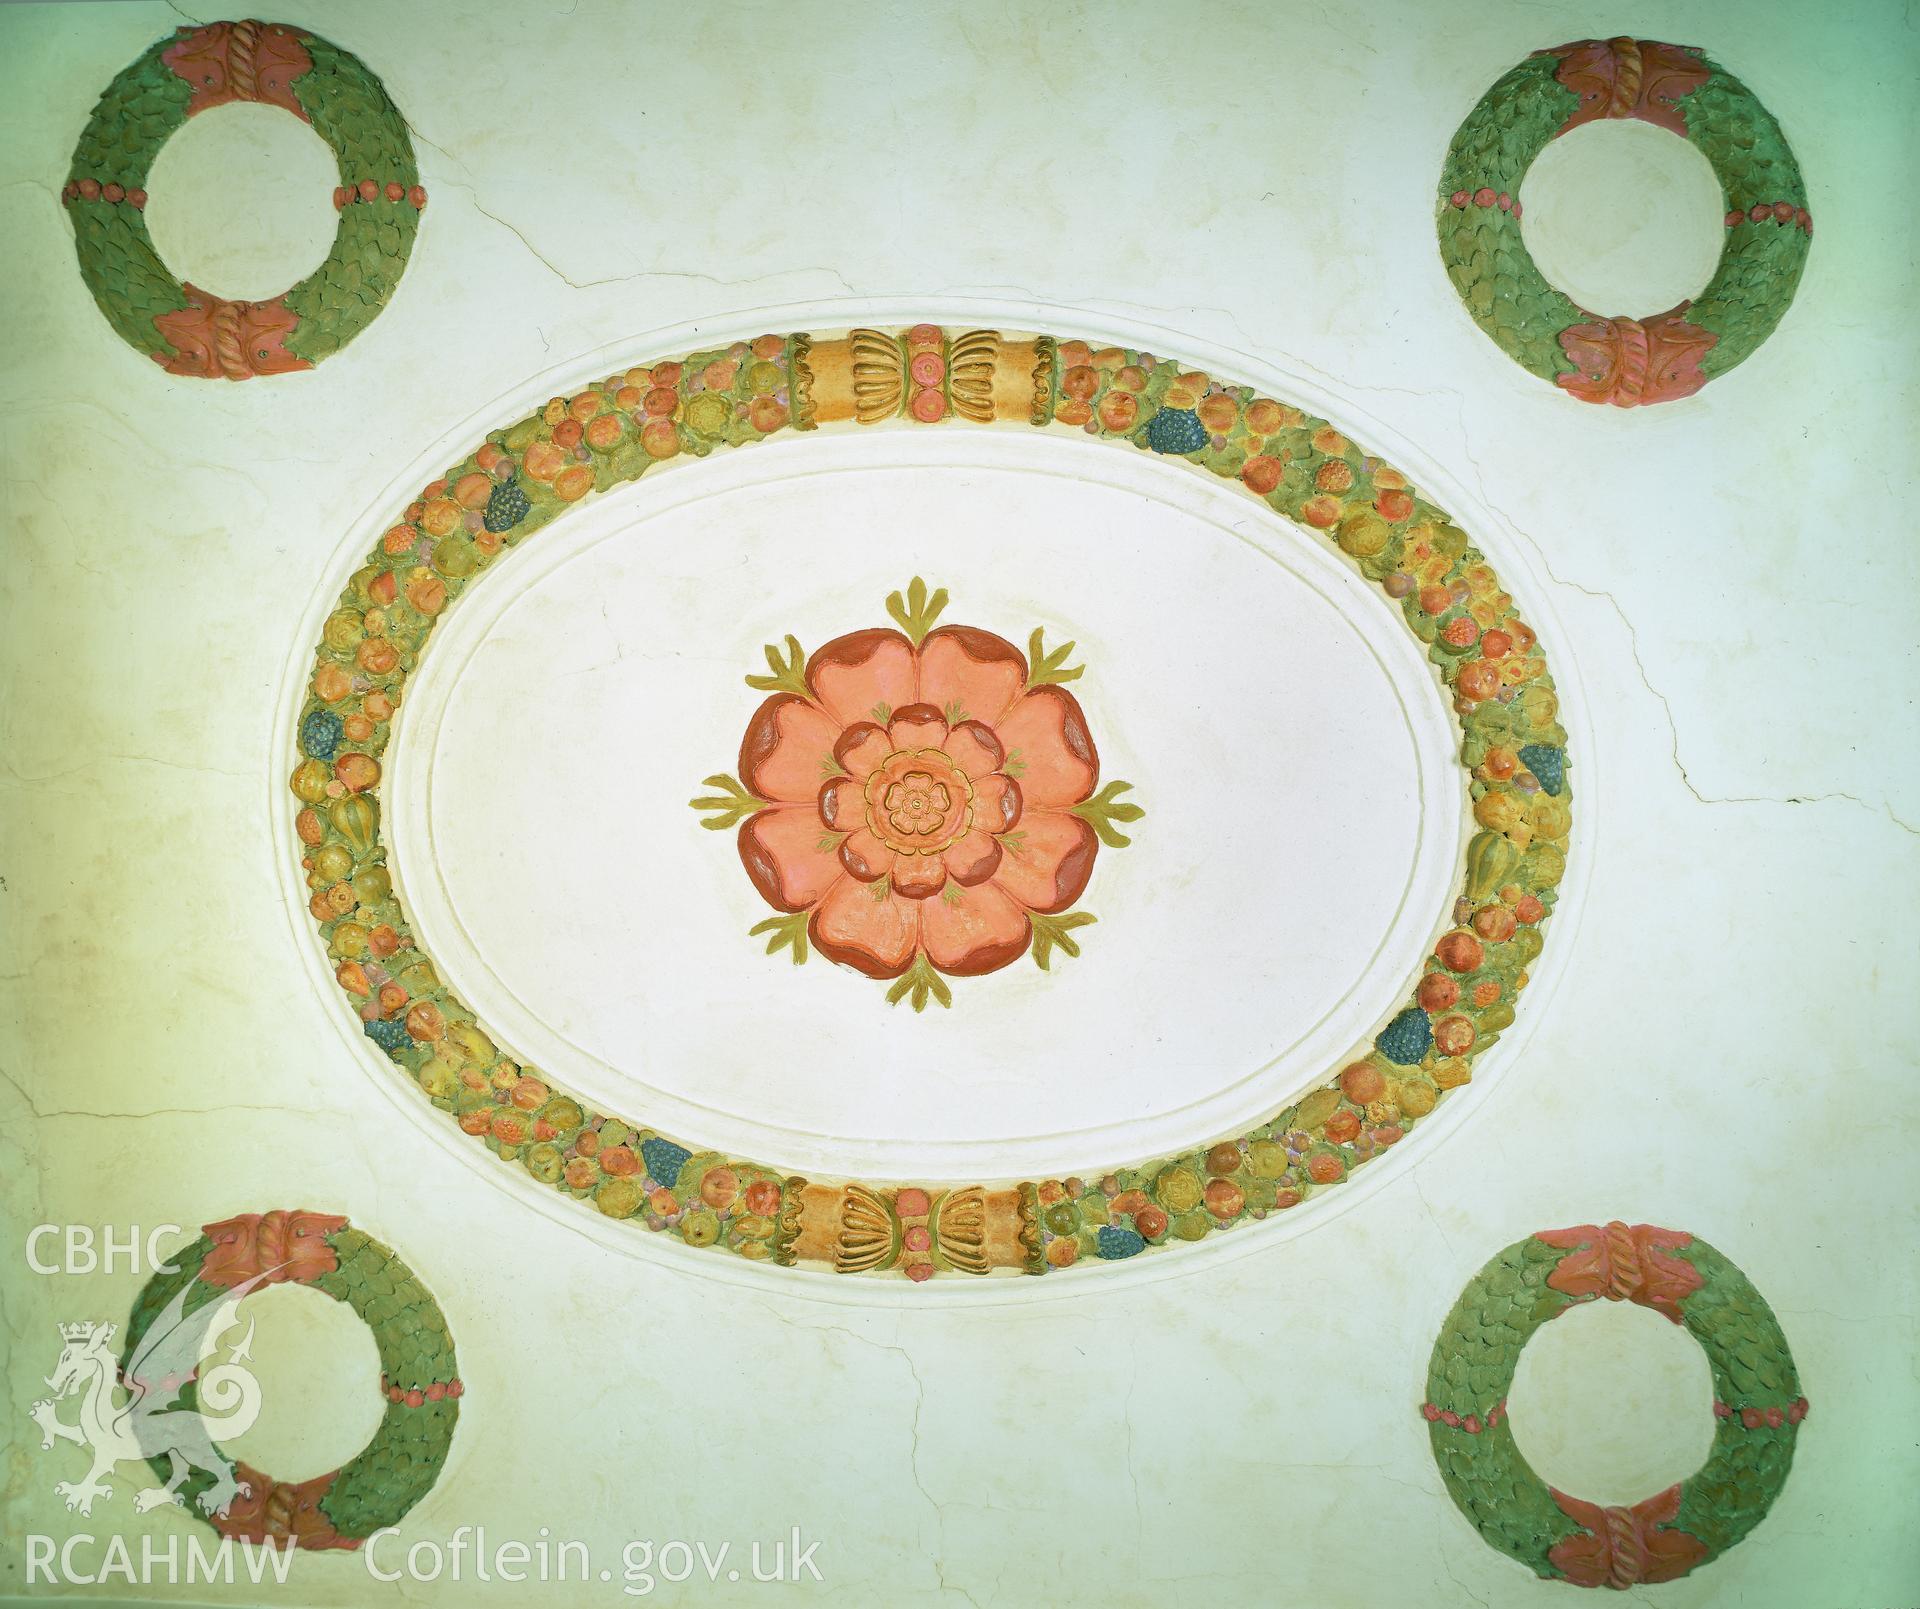 RCAHMW colour transparency of the decorated ceiling at the Kings Head, Monmouth.